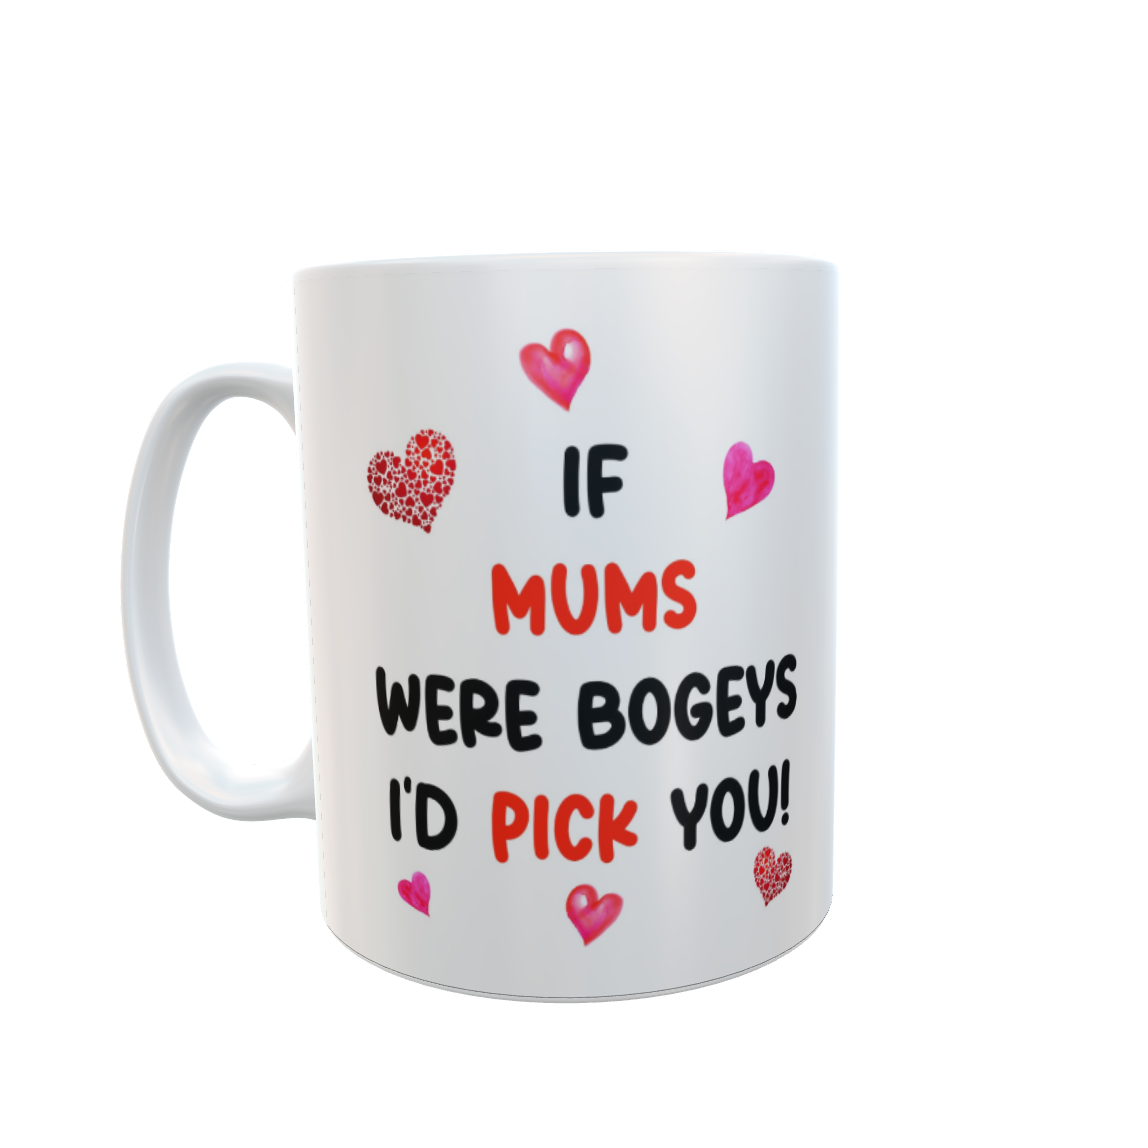 Mum Mug Gift - If Mums Were Bogeys I'd We'd Pick You - Nice Funny Cheeky Novelty Cup Present